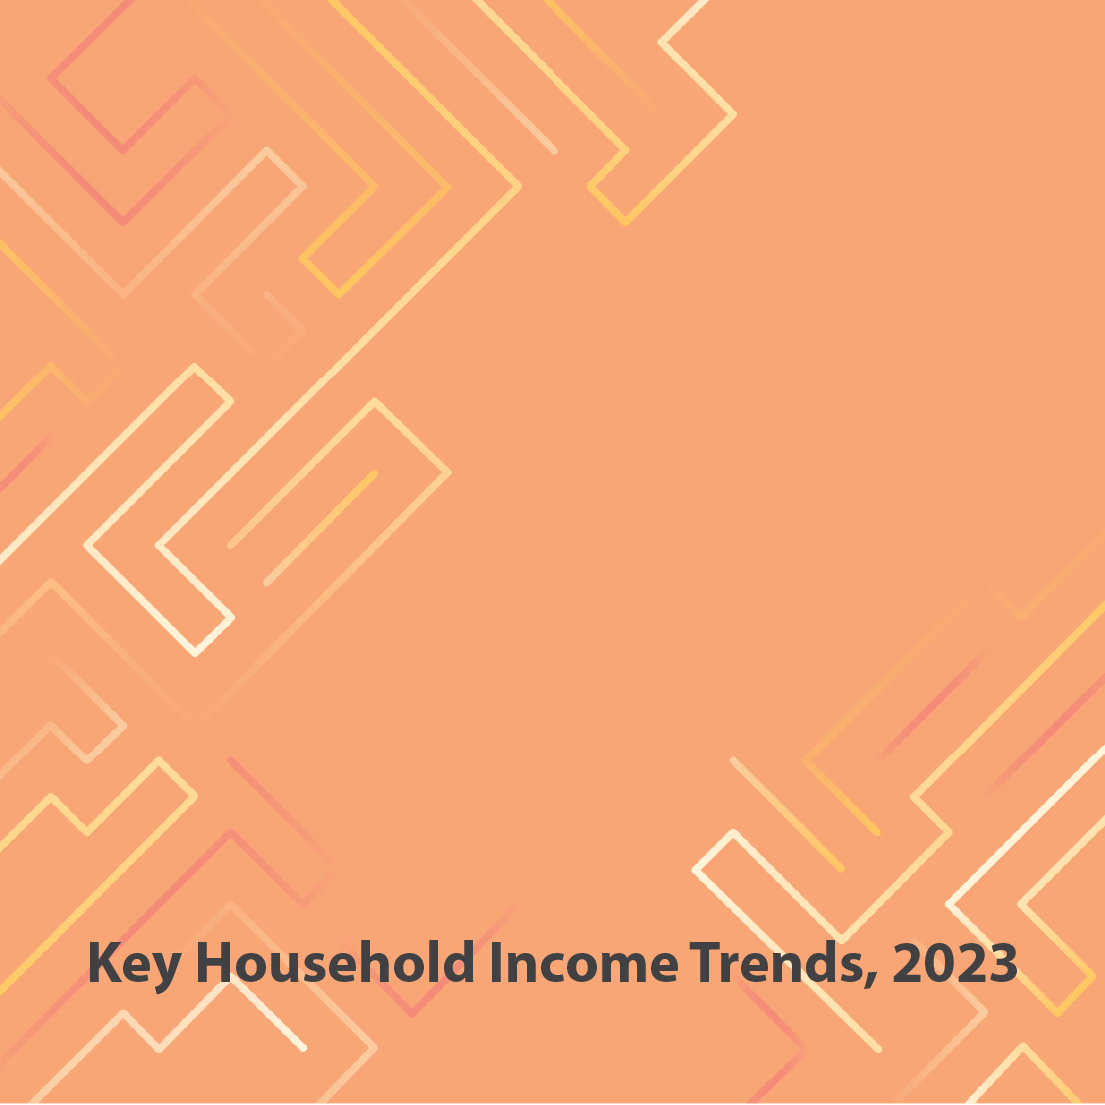 Key Household Income Trends 2023